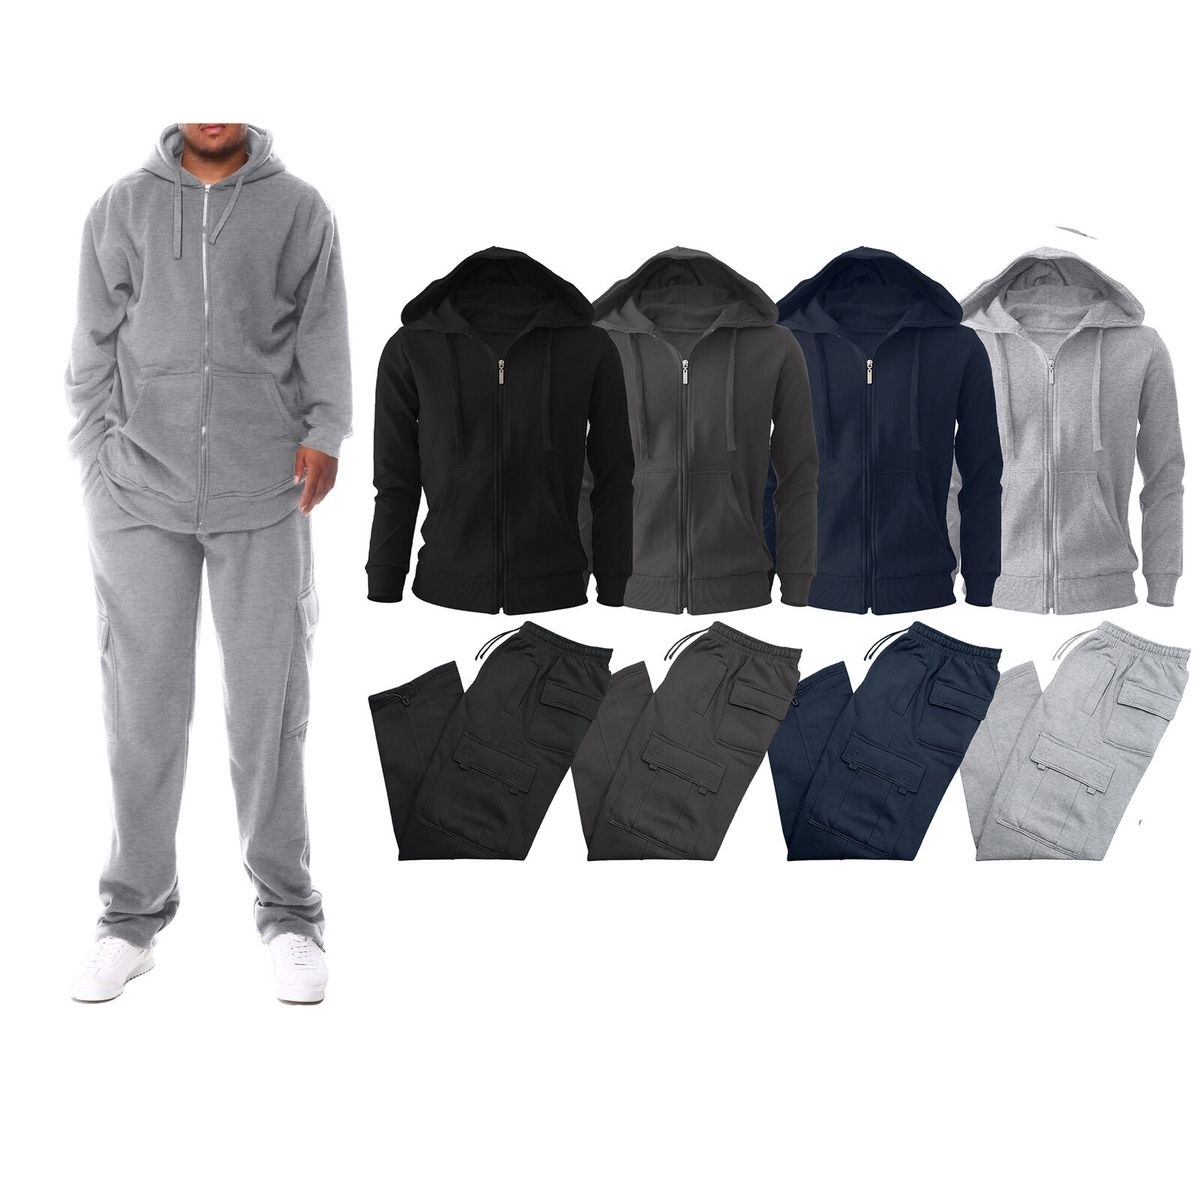 Multi-Pack: Men's Big & Tall Winter Warm Athletic Active Cozy Fleece Lined Multi-Pocket Full Zip Up Cargo Tracksuit - Grey, 1-pack, Small